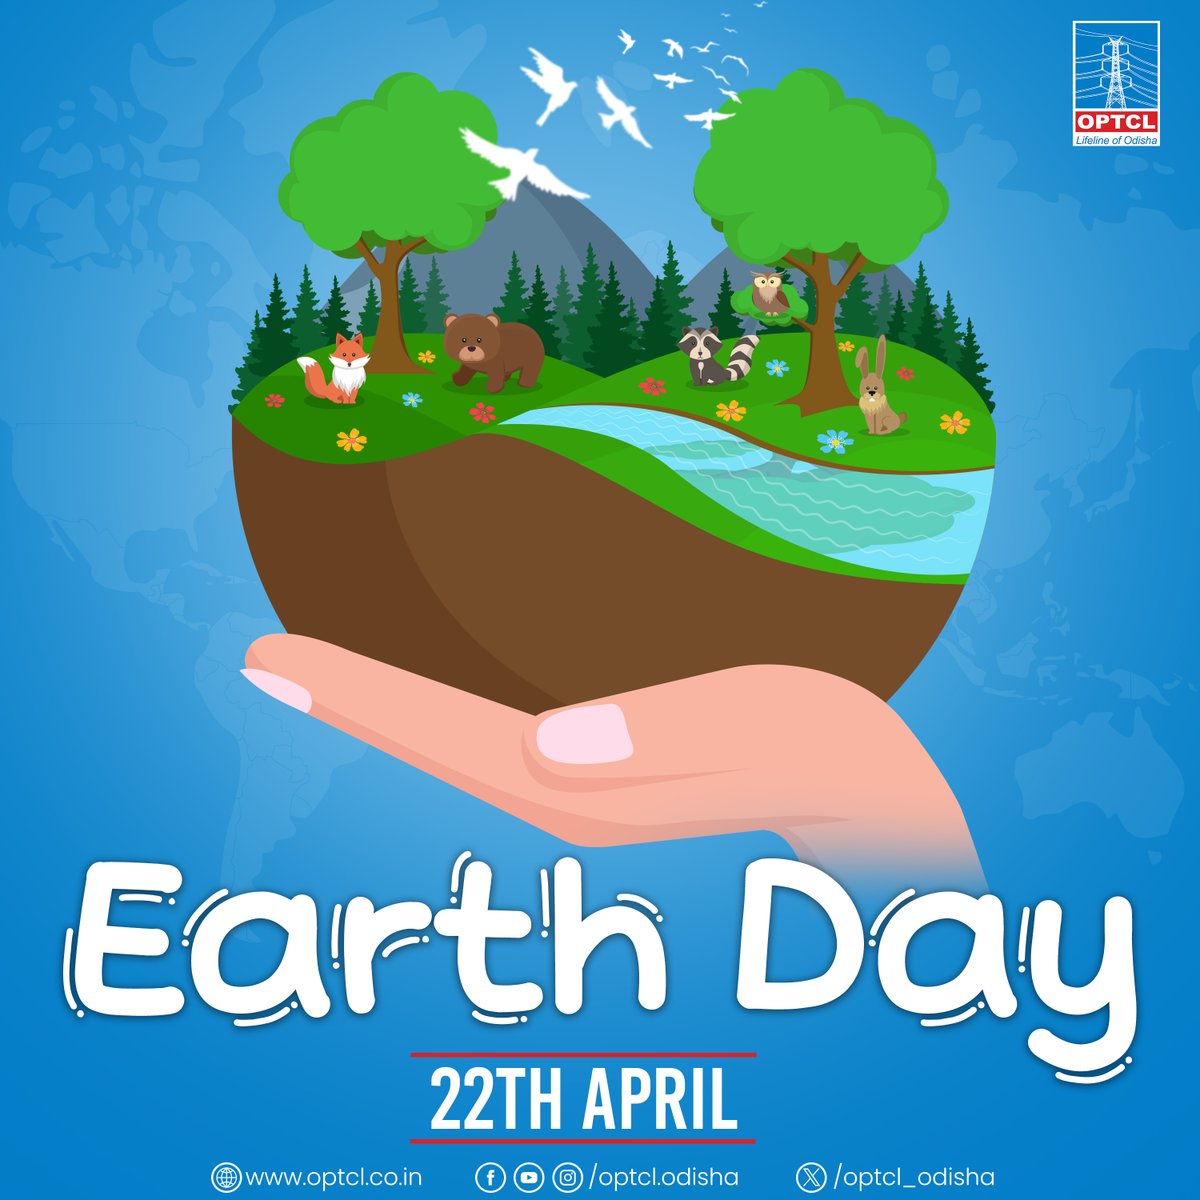 Celebrate #EarthDay by planting trees, conserving water, and supporting renewable energy initiatives. #OPTCL